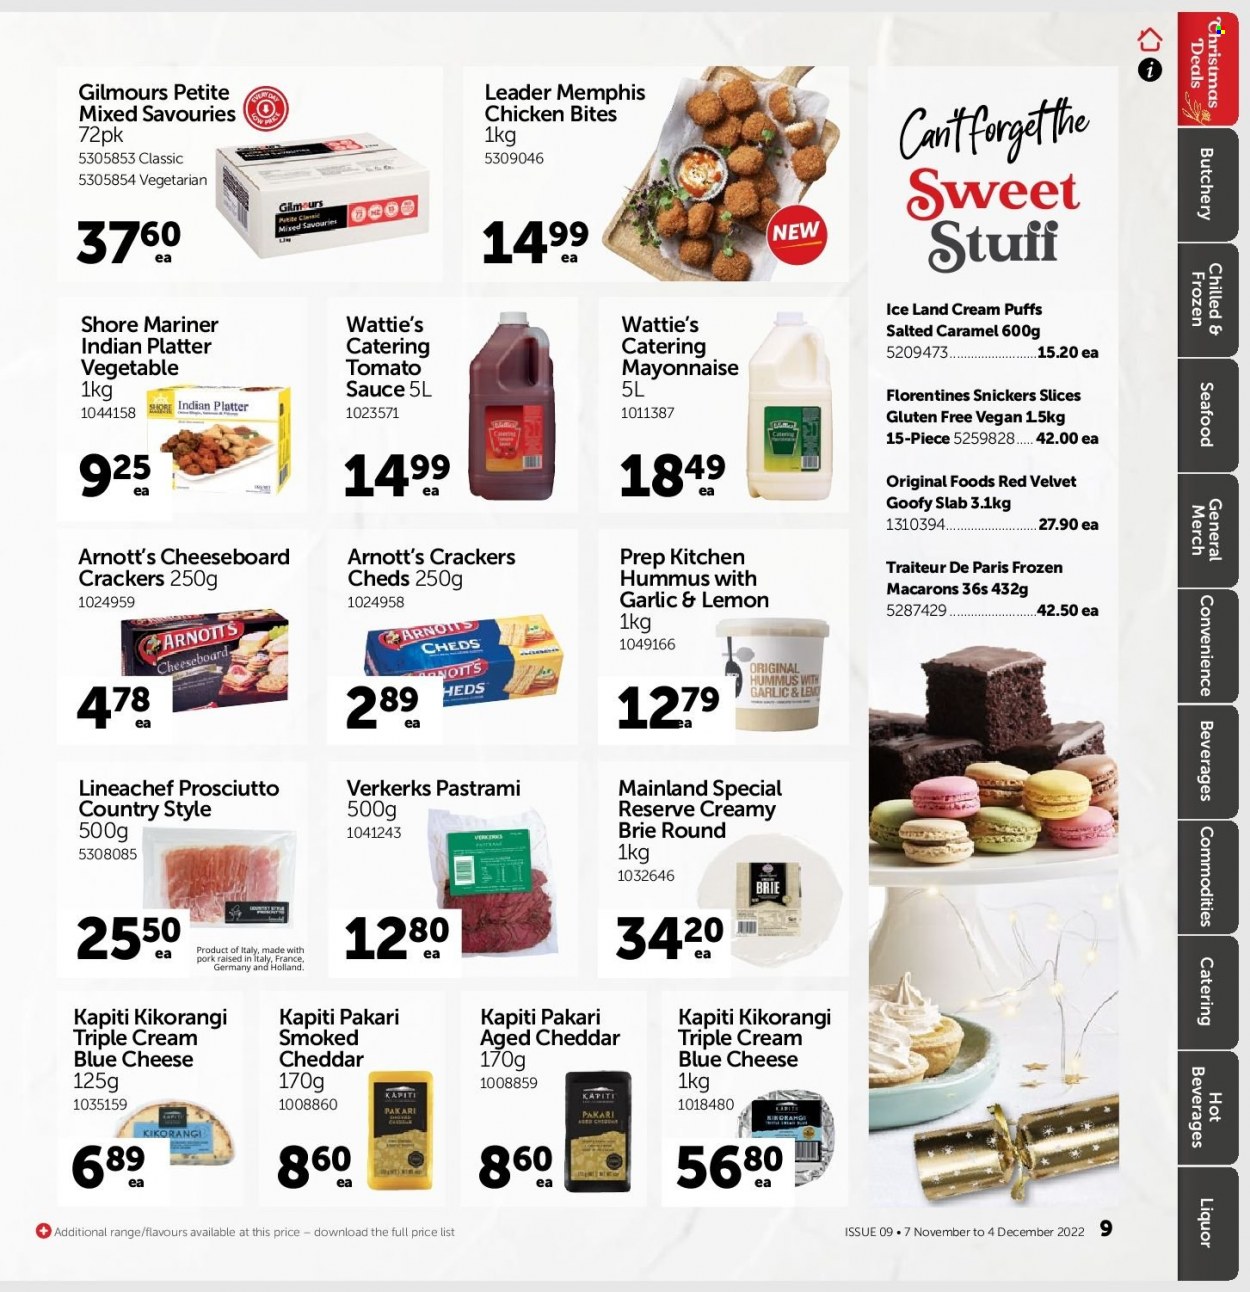 thumbnail - Gilmours mailer - 07.11.2022 - 04.12.2022 - Sales products - puffs, cream puffs, seafood, Shore Mariner, sauce, Wattie's, prosciutto, pastrami, hummus, blue cheese, cheddar, cheese, brie, mayonnaise, chicken bites, Snickers, crackers, tomato sauce, liquor, beef meat. Page 8.